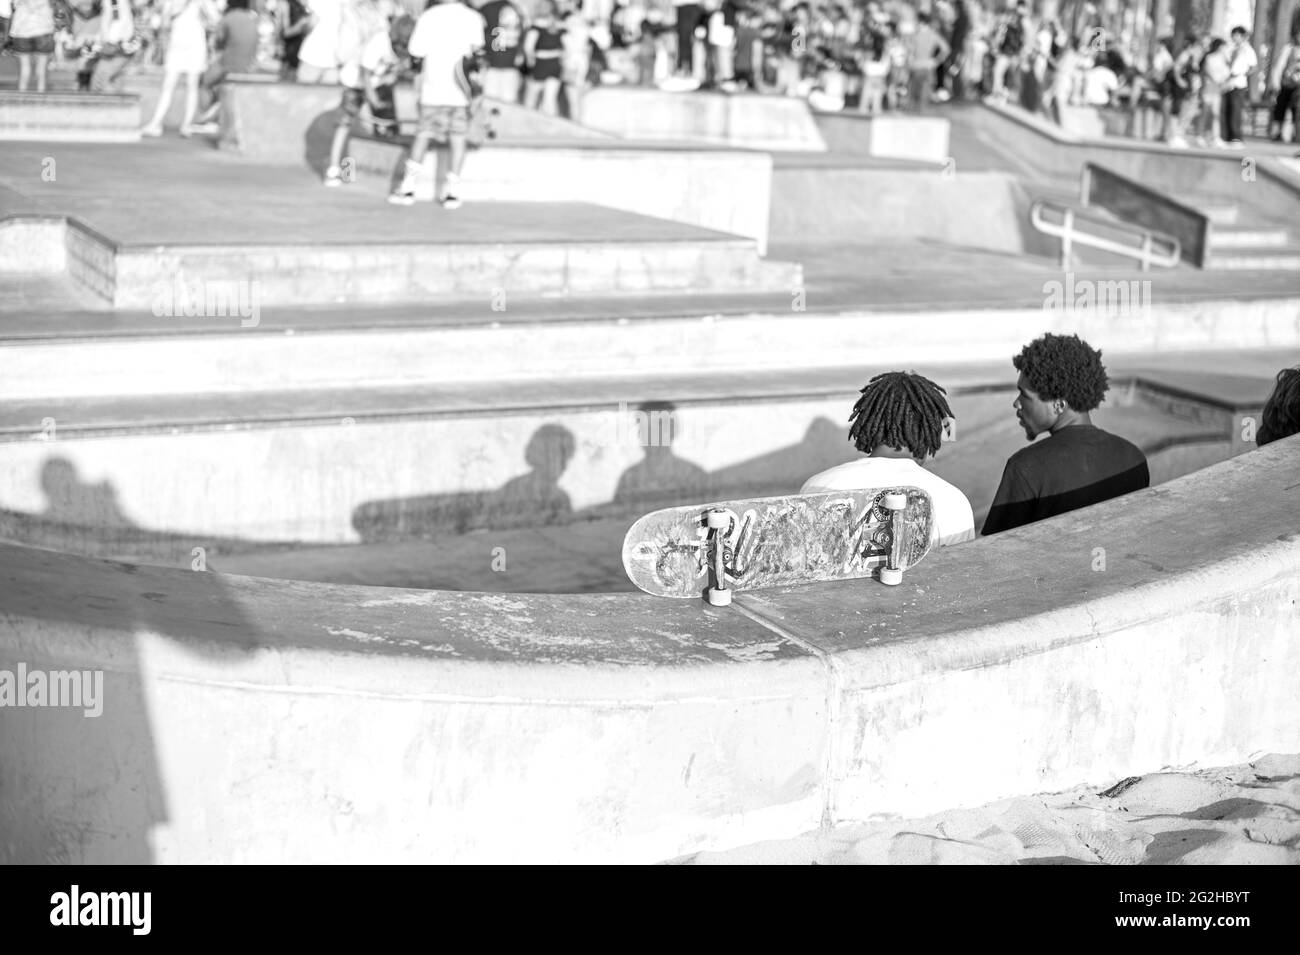 The skaters and the lifestyle at the Venice Beach Skate Park in Santa Monica - Los Angeles, California, USA Stock Photo